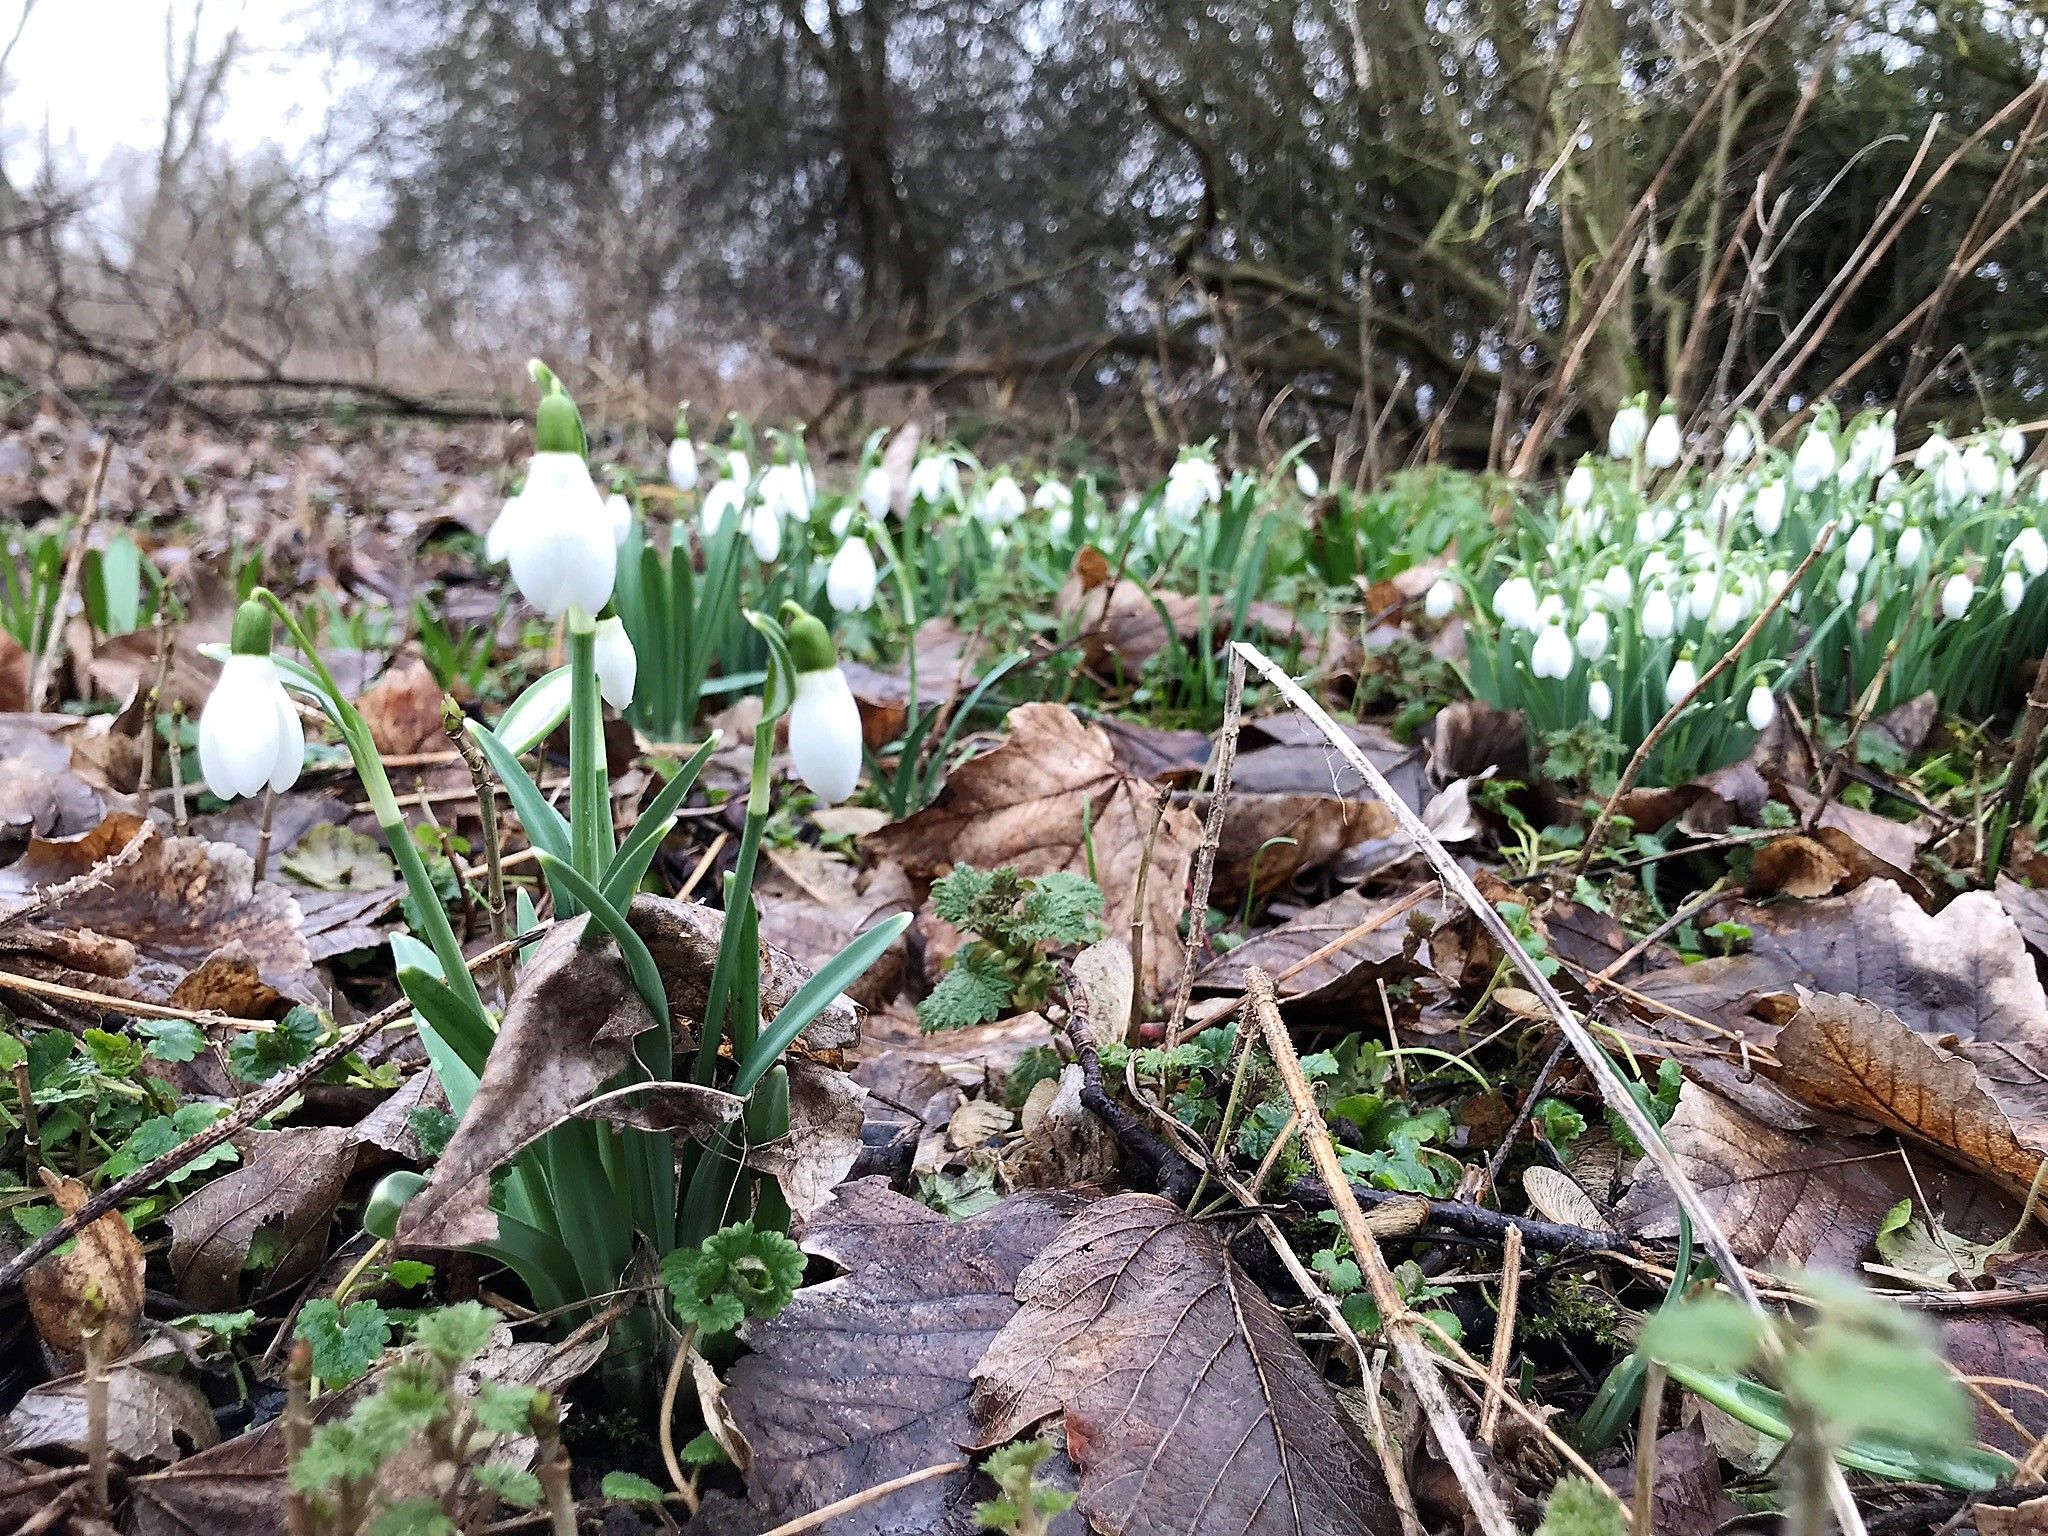 A lucky find! Snowdrops!